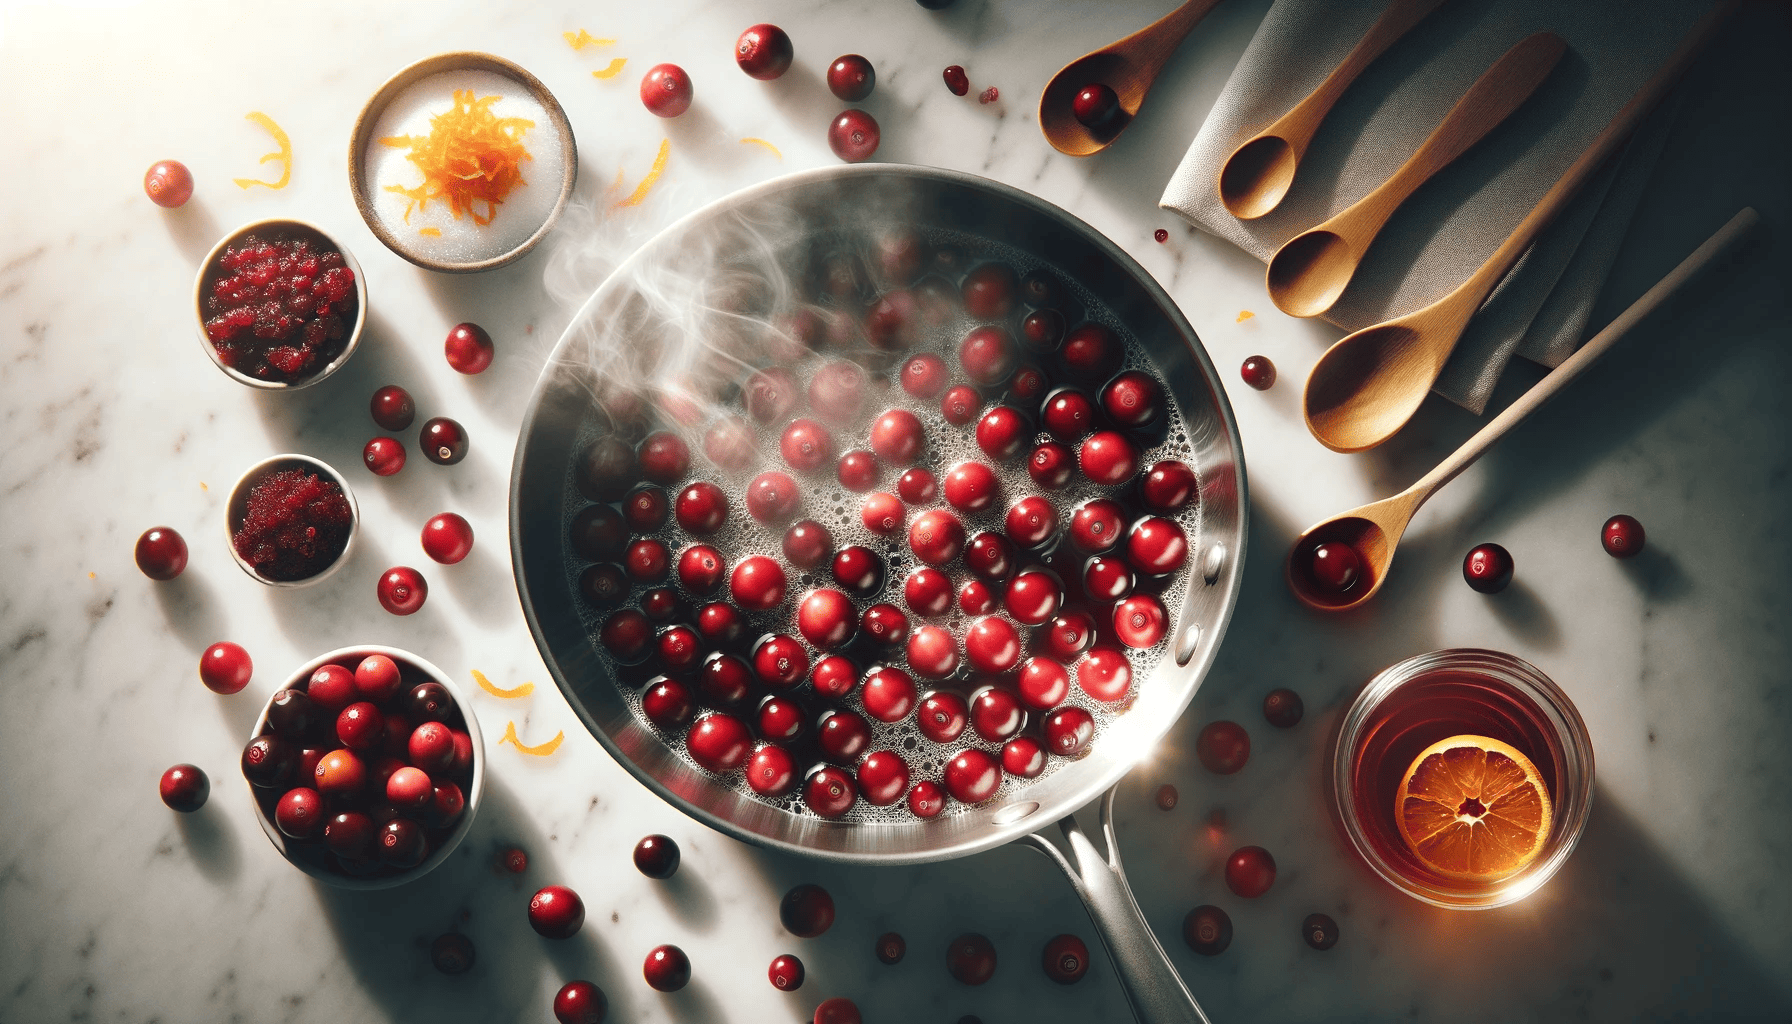 Midway cooking scene, with cranberries cooking in a saucepan